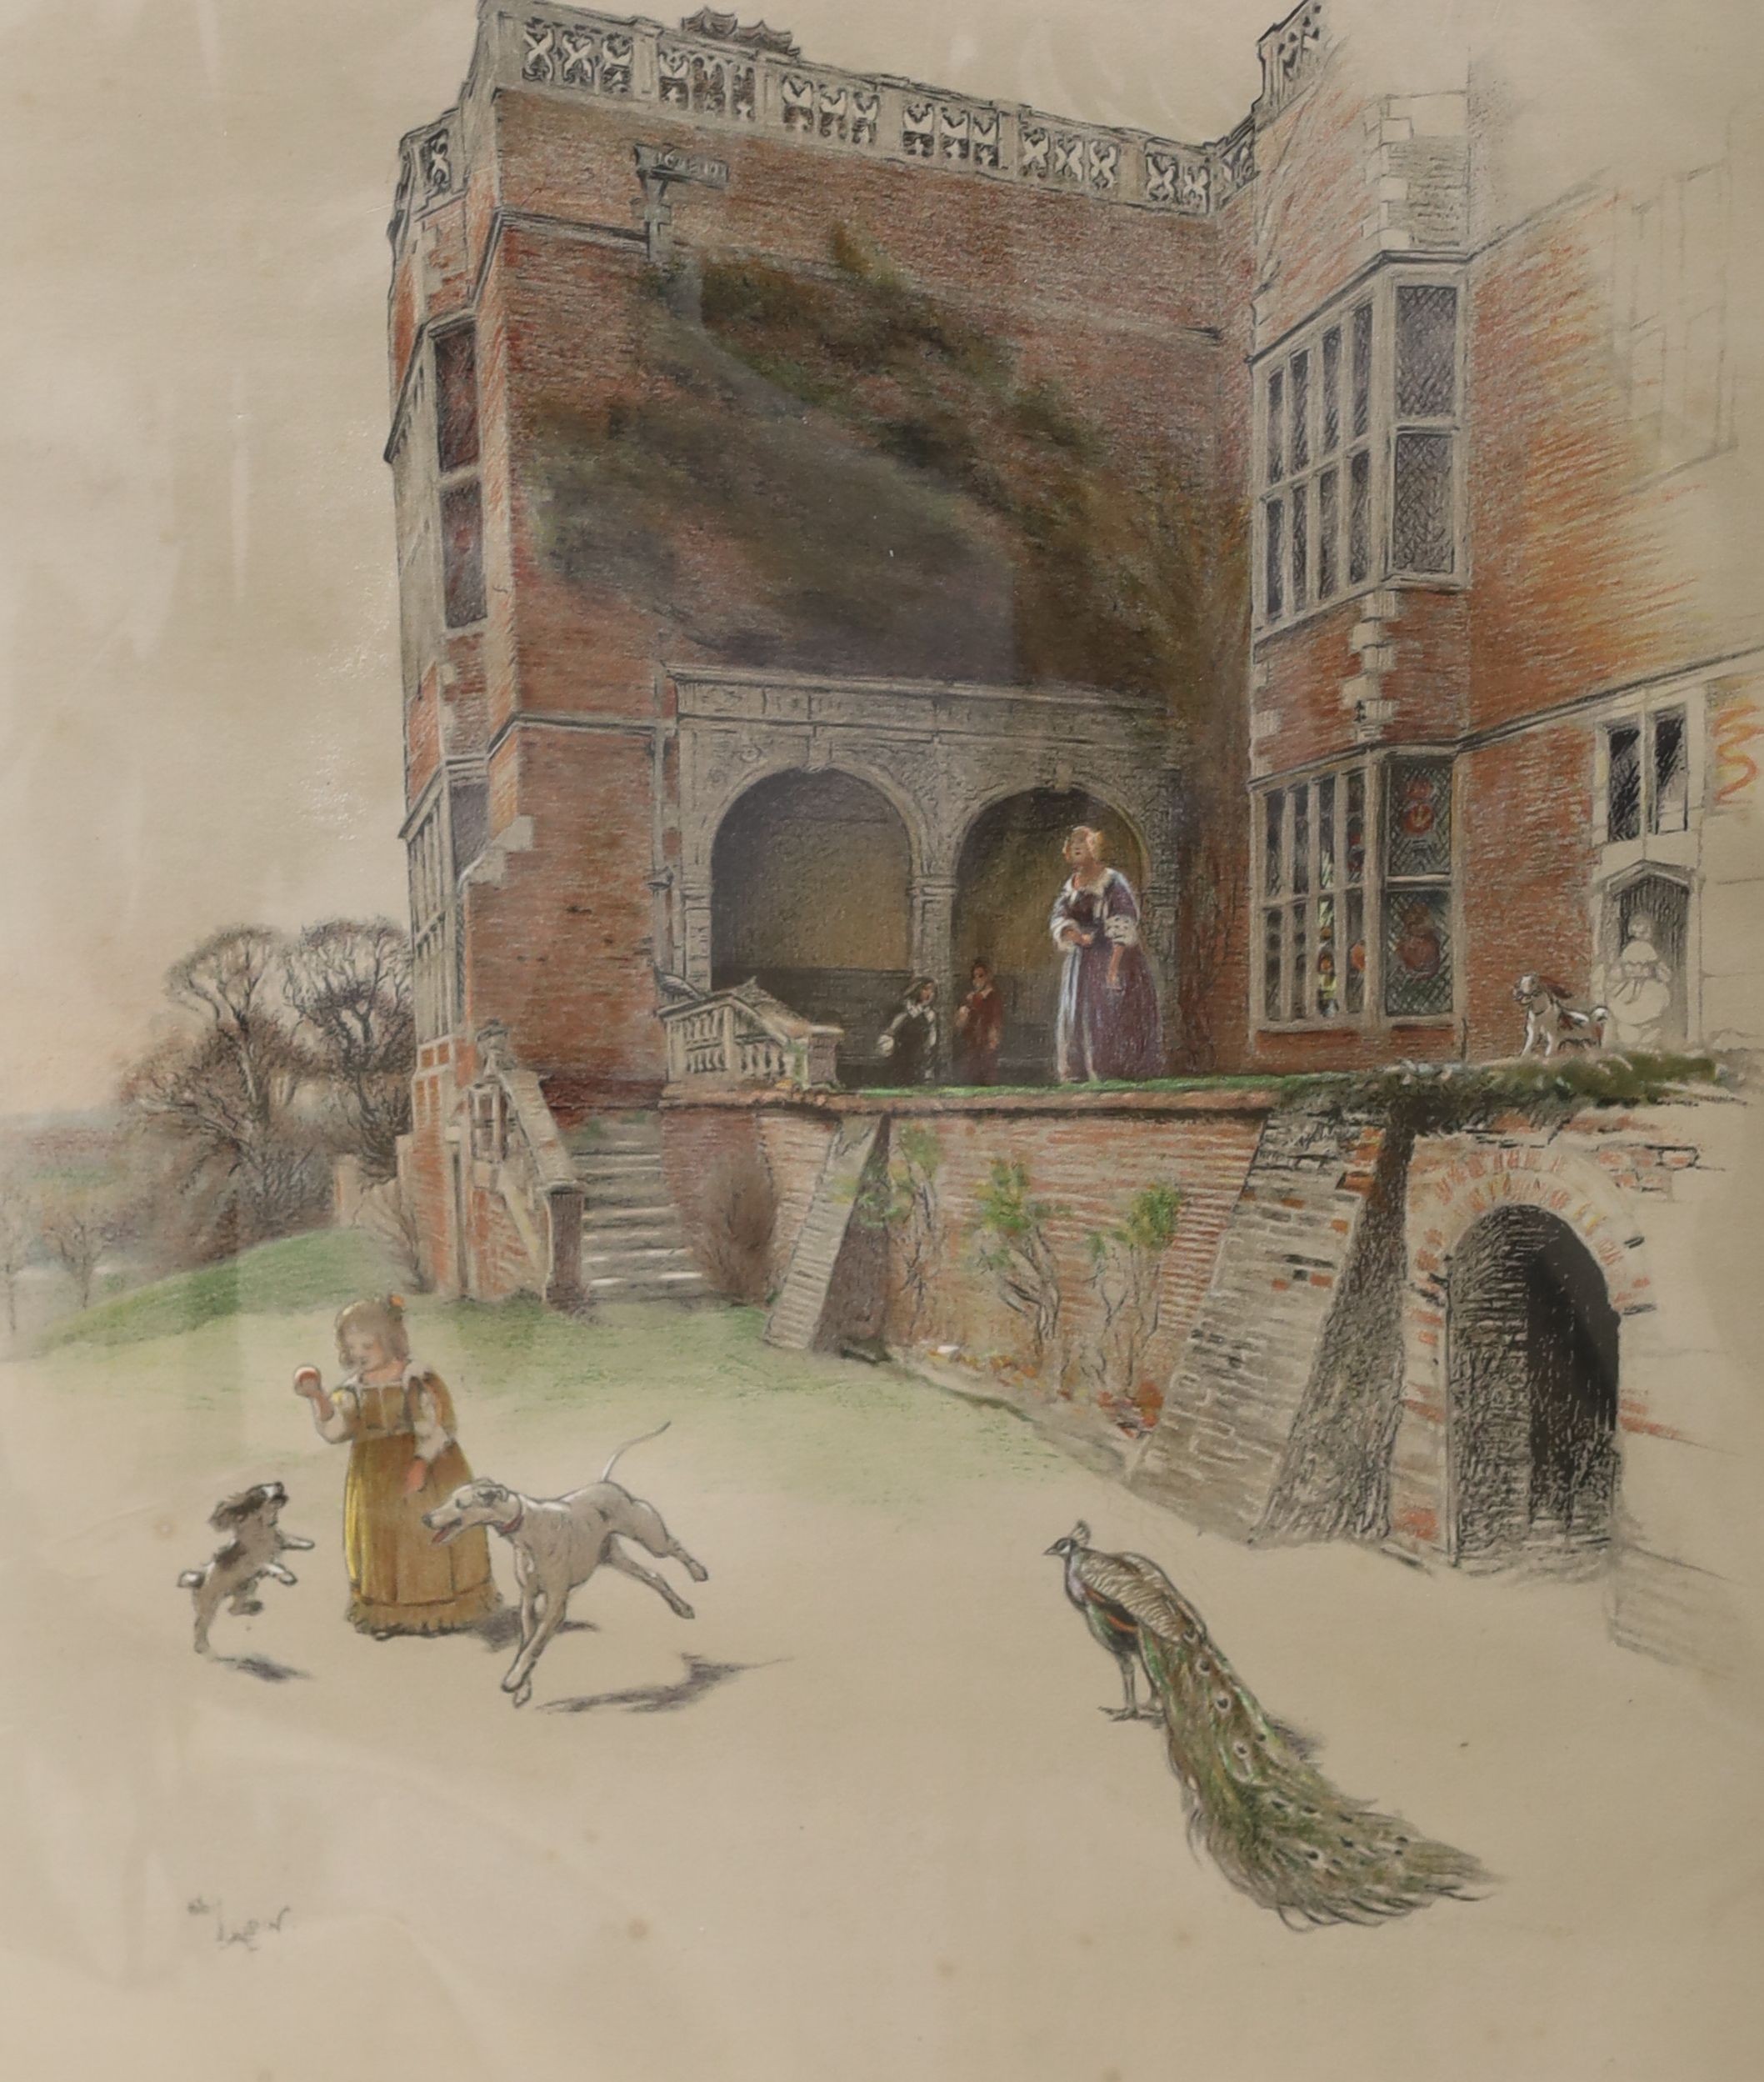 Cecil Aldin, colour print, Child and dogs beside a 17th century house, signed in pencil, 45 x 36cm, unframed